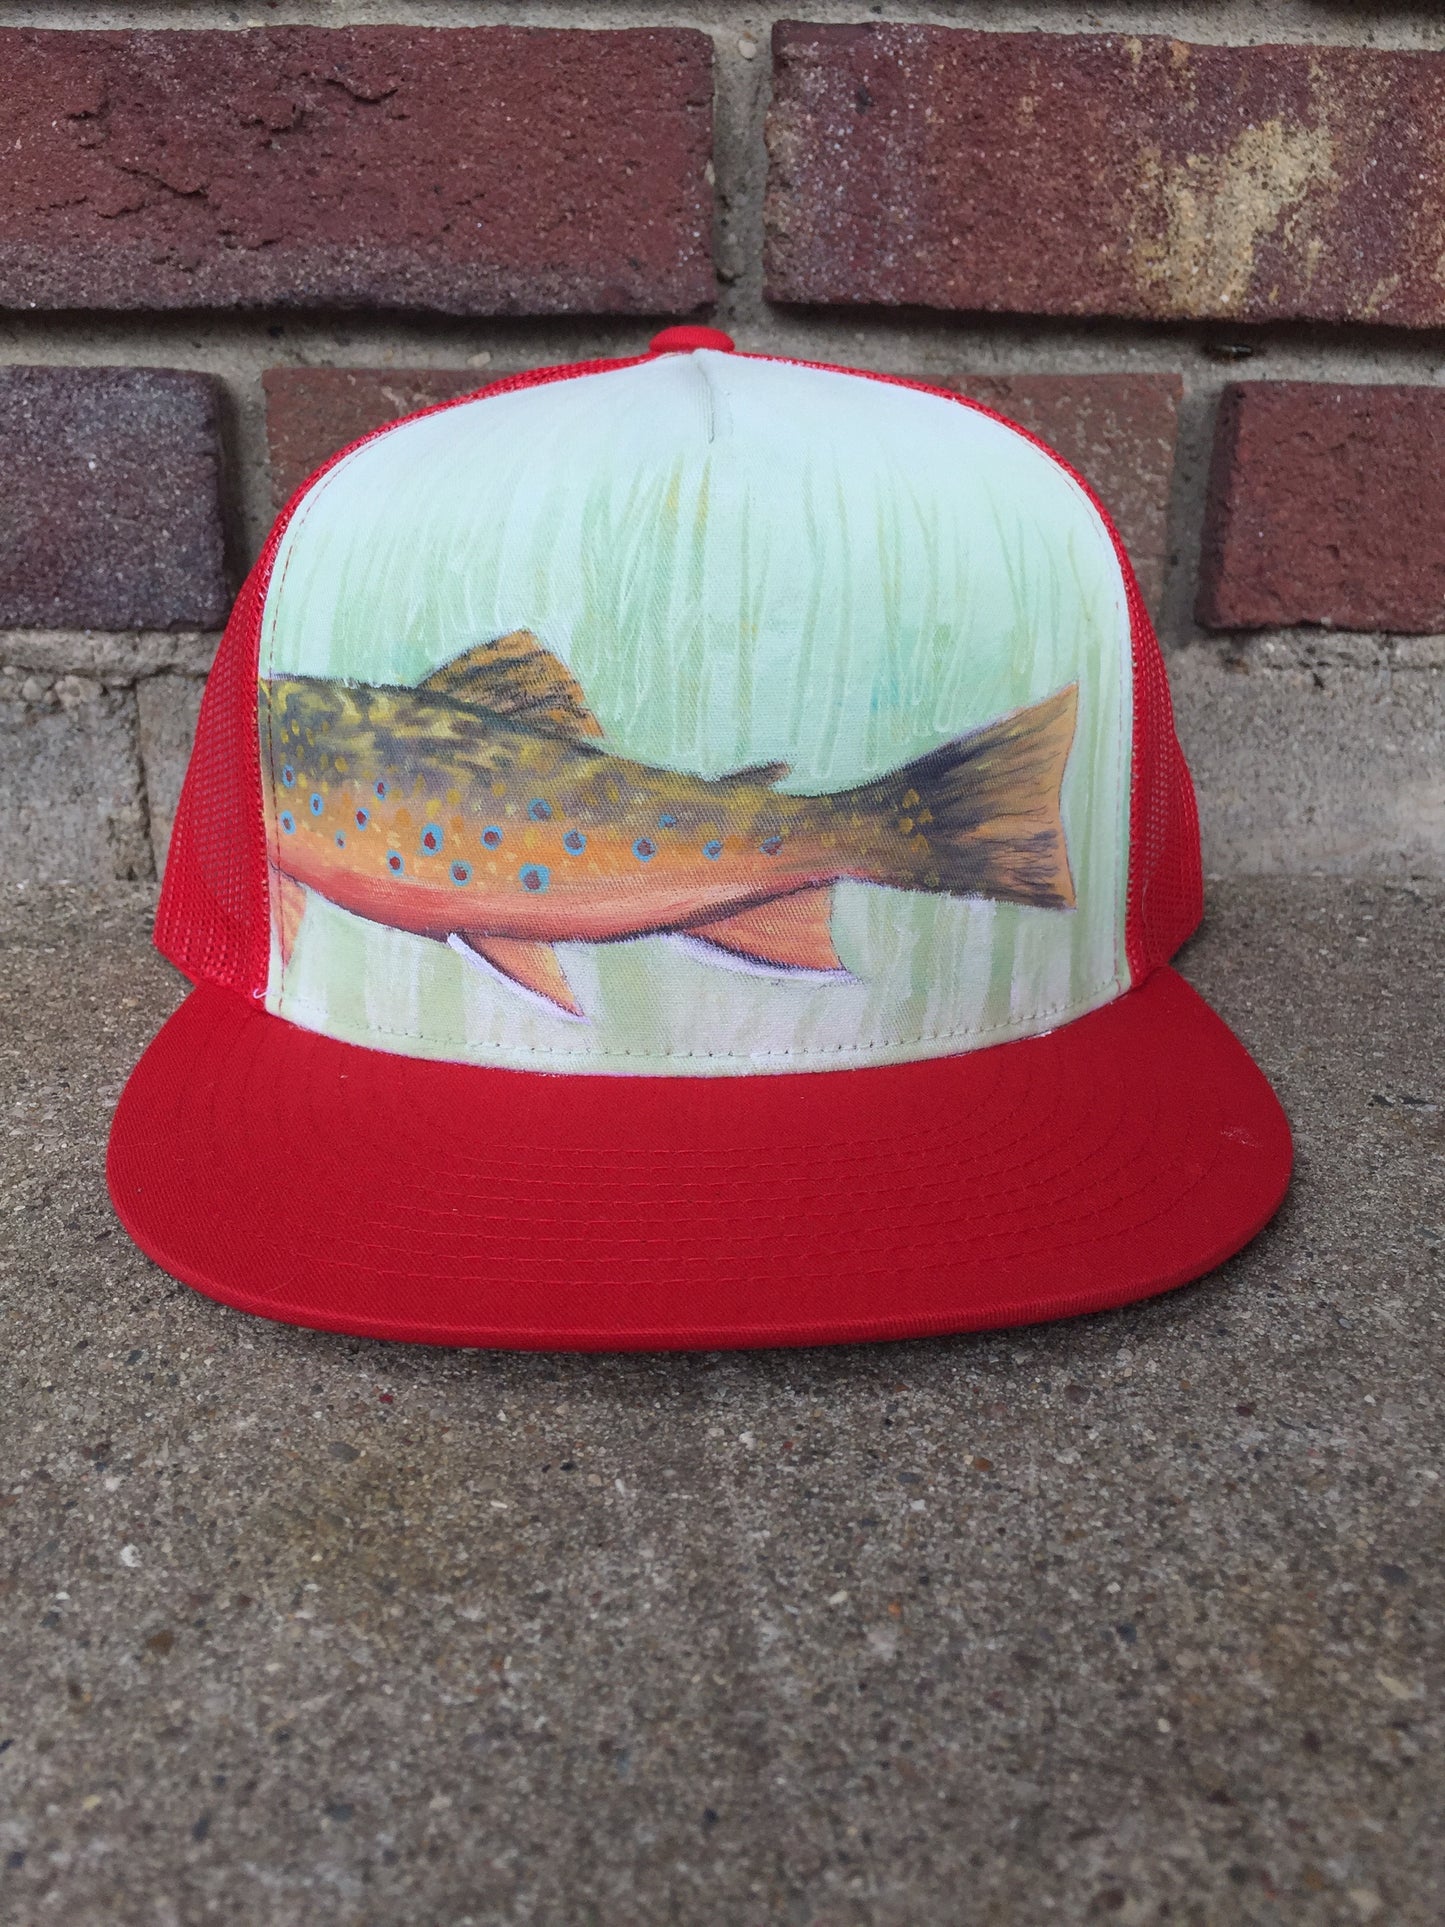 "Fish Tale" Hand Painted on Red Snapback Trucker Hat